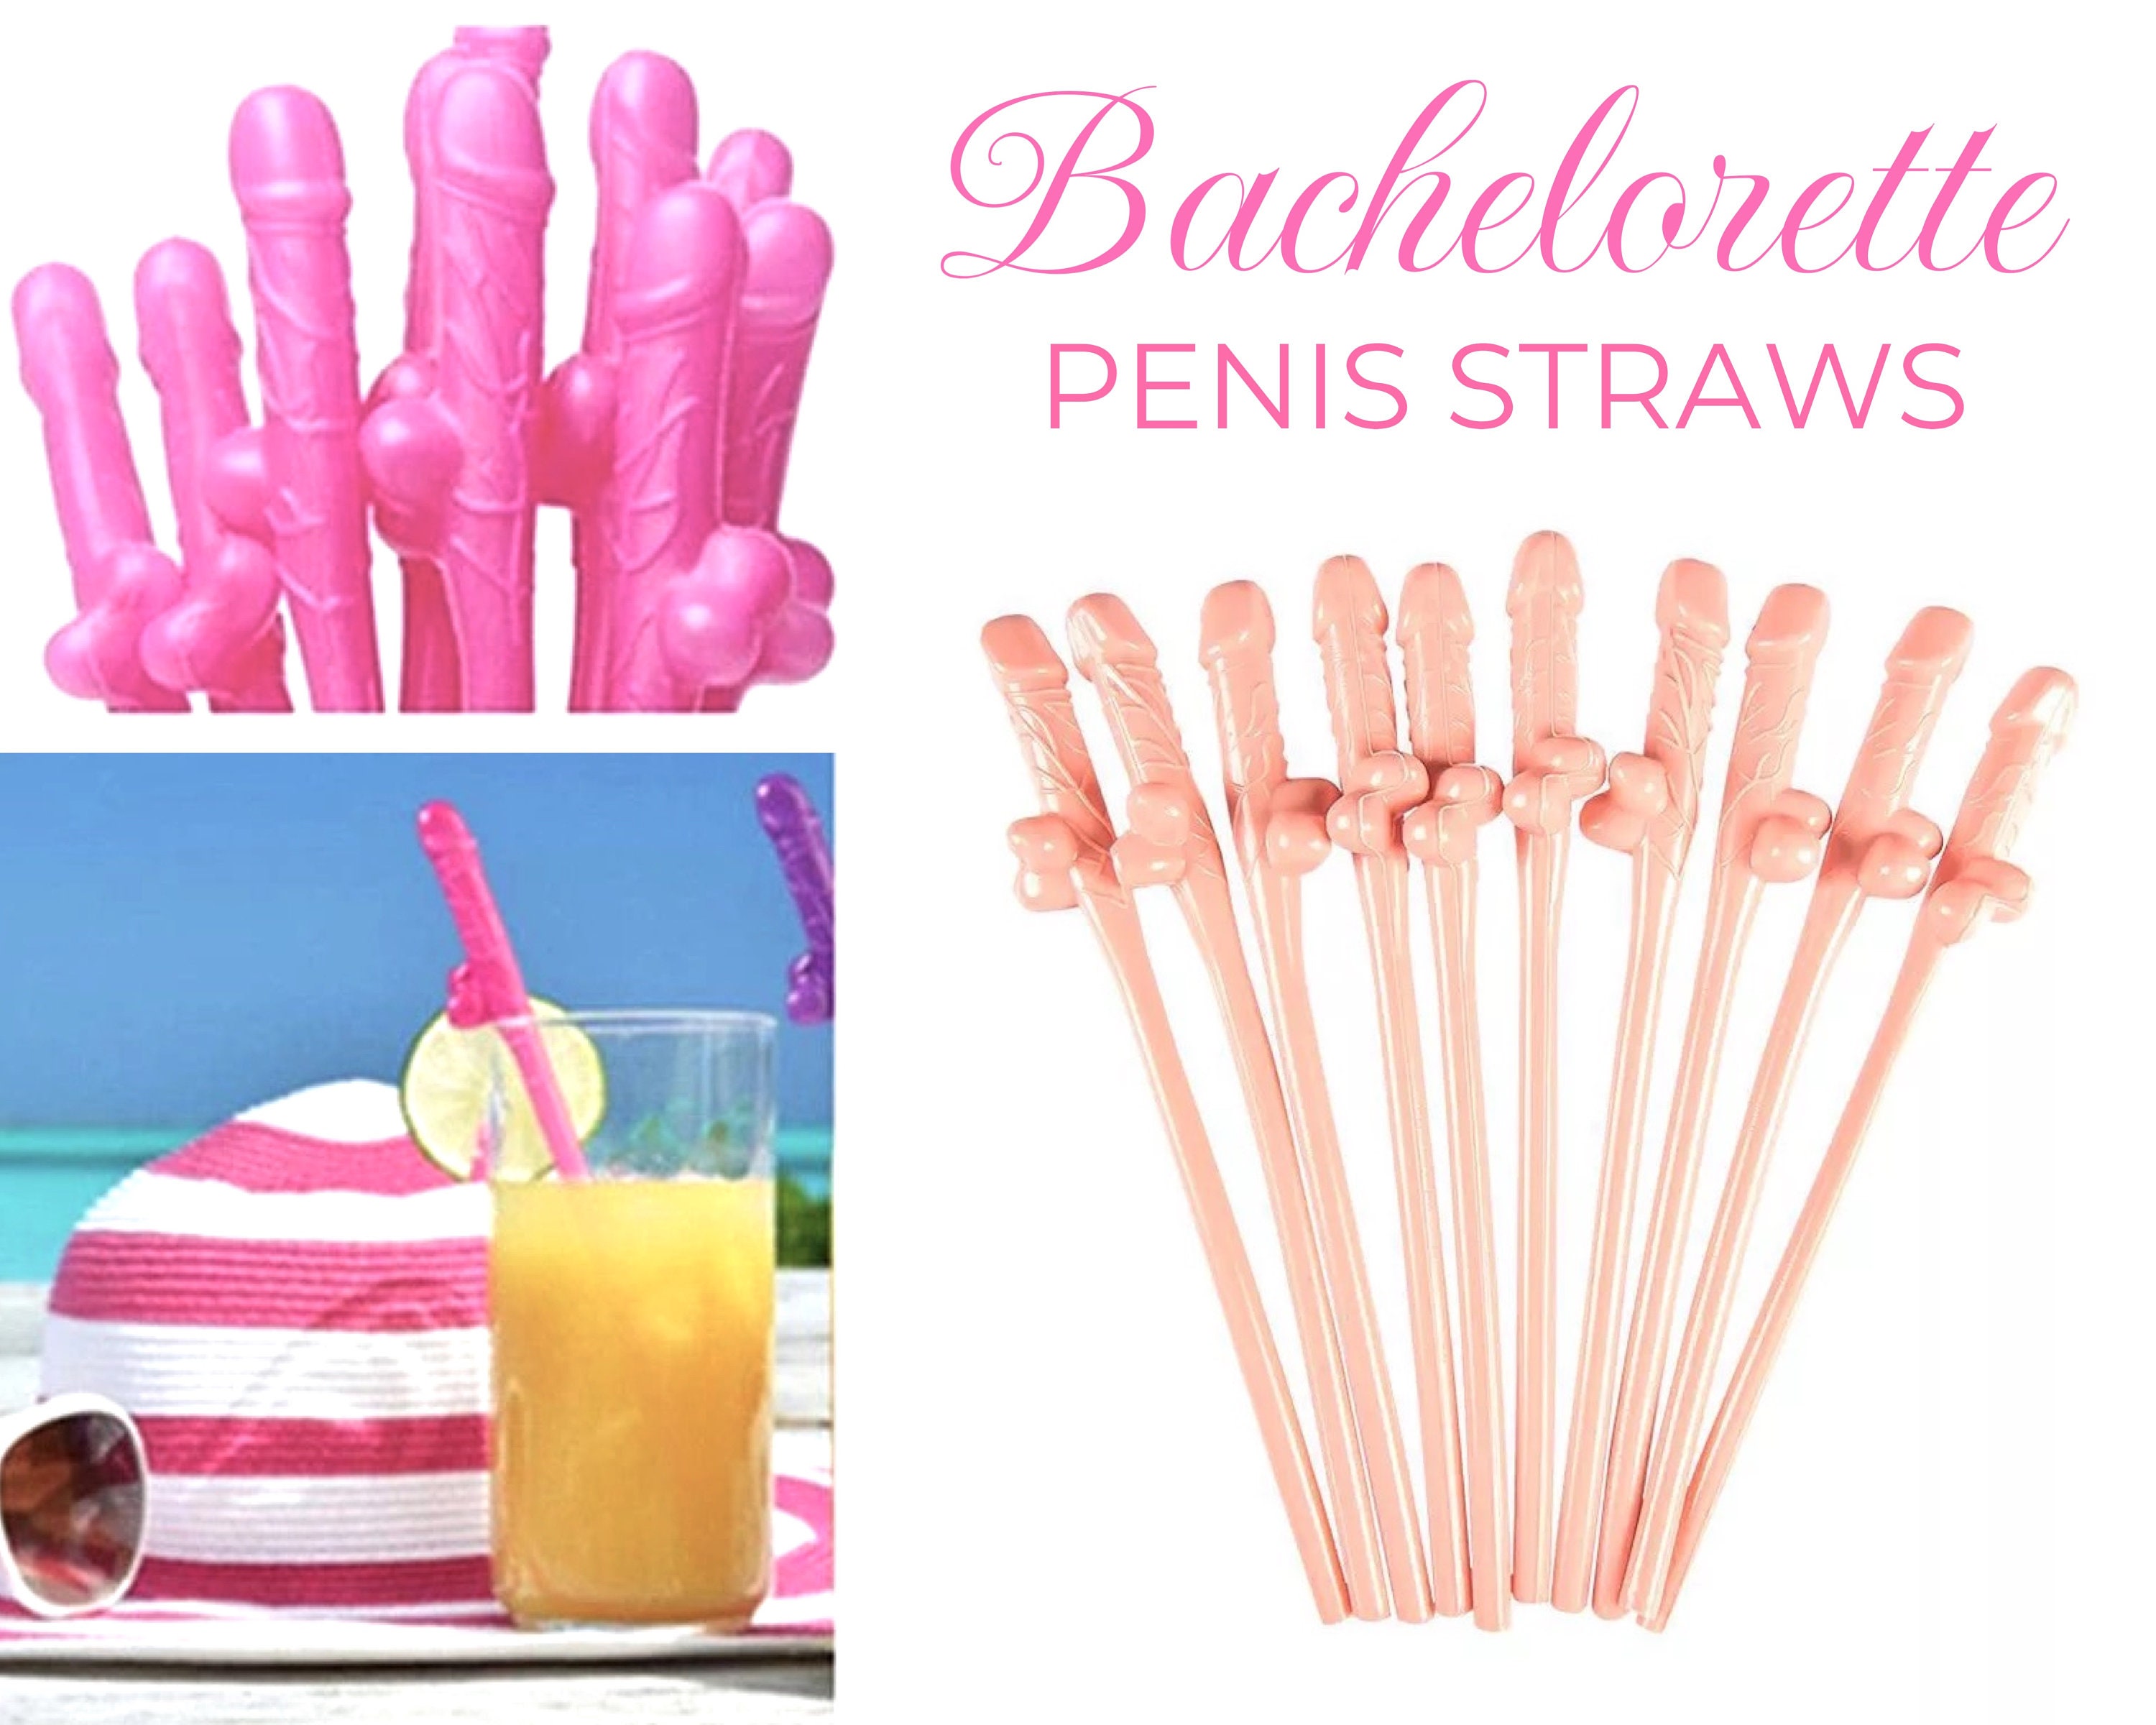 Penis Straws Pink or Natural Silly Willy Bridal Bash Shower